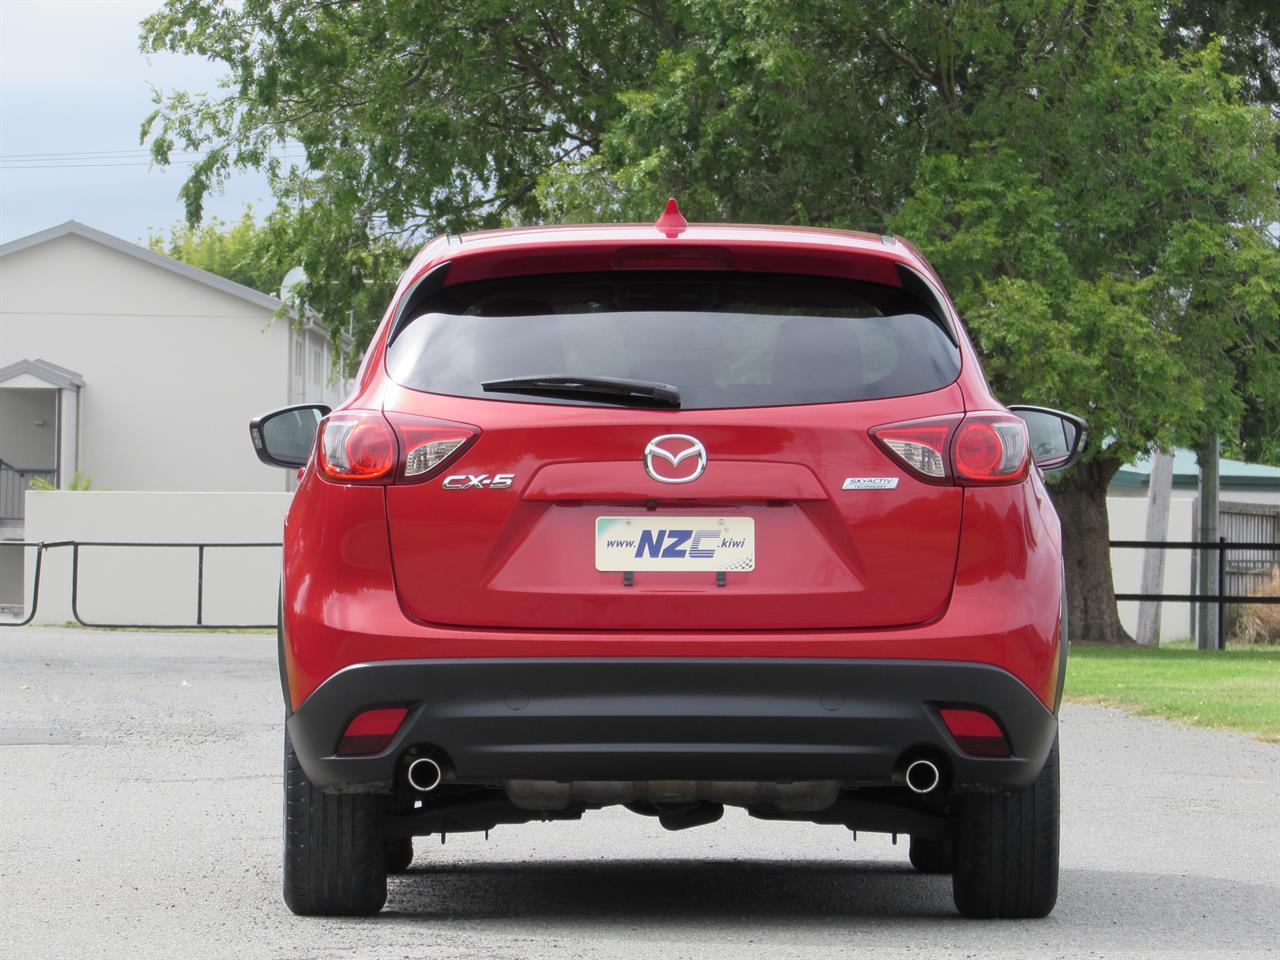 2012 Mazda CX-5 only $74 weekly